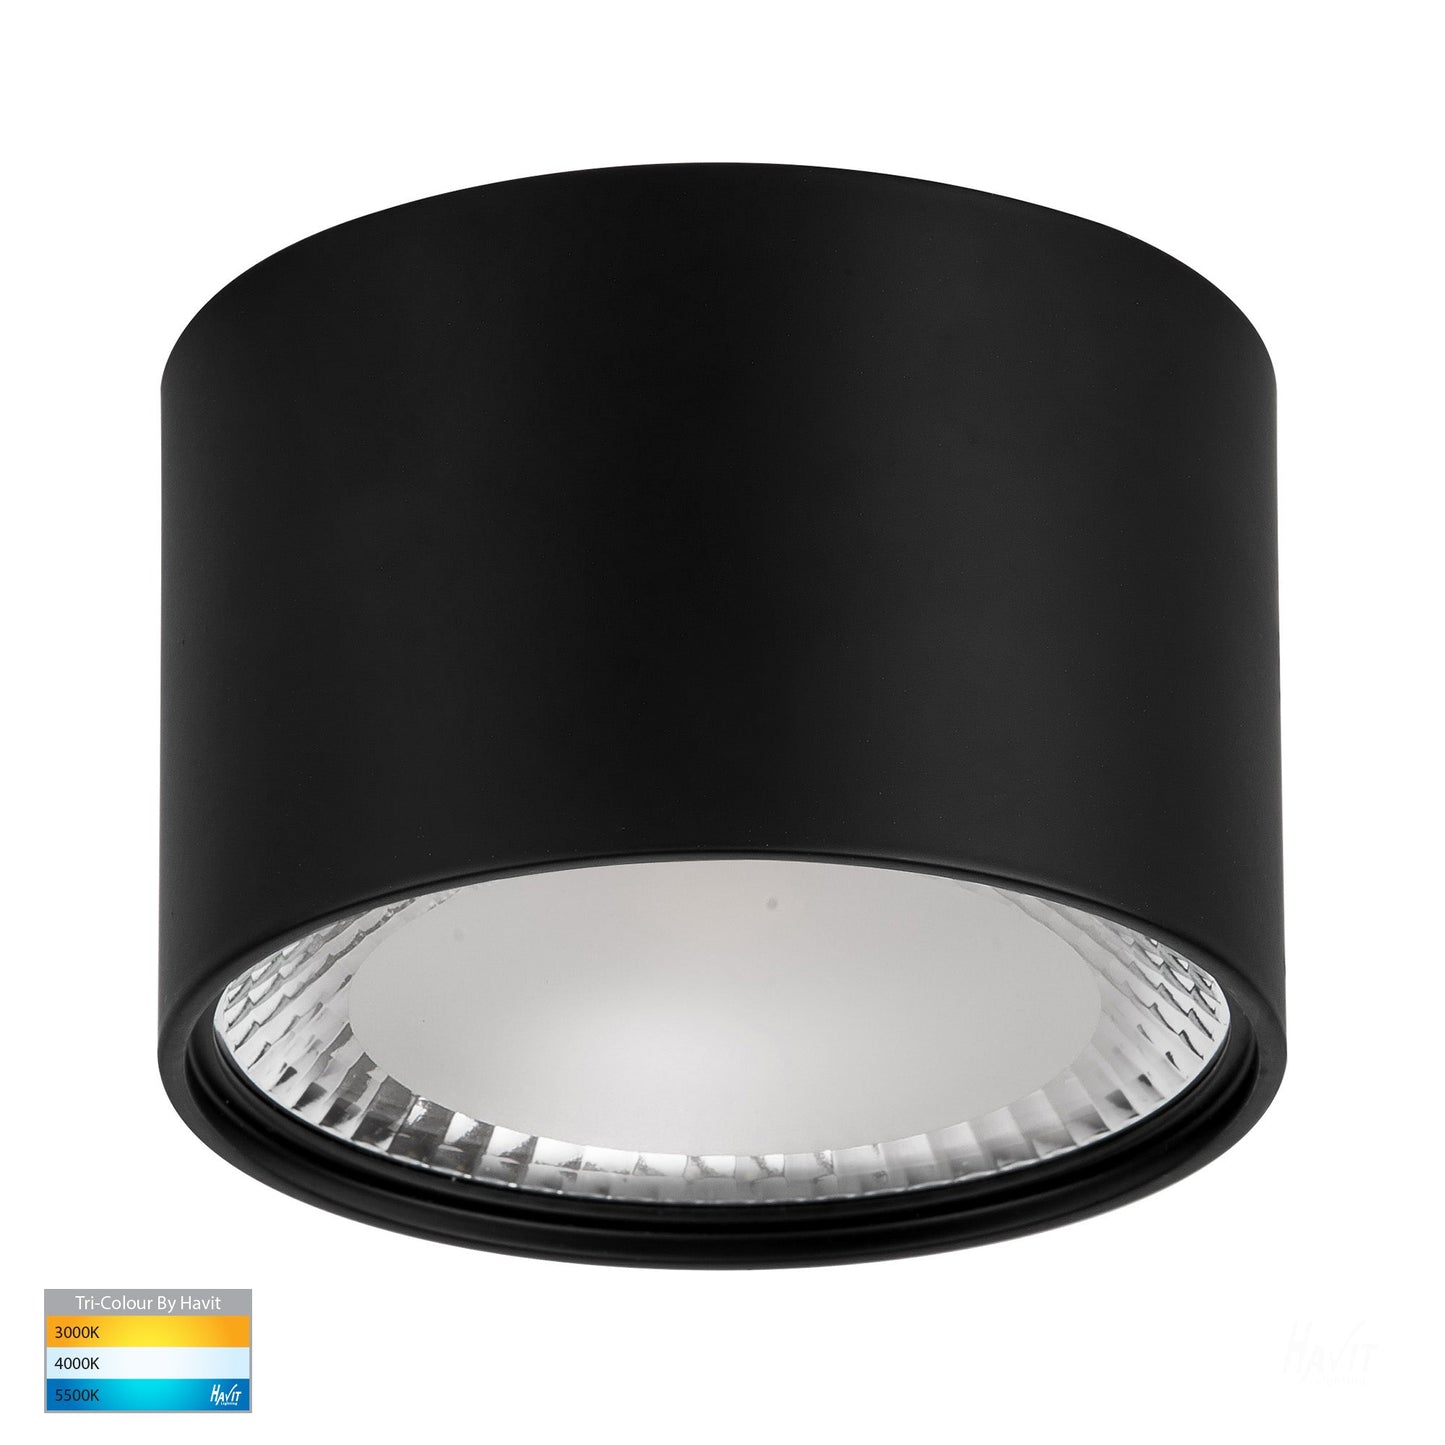 Black Surface Mounted Round Downlight  HV5803t-Blk